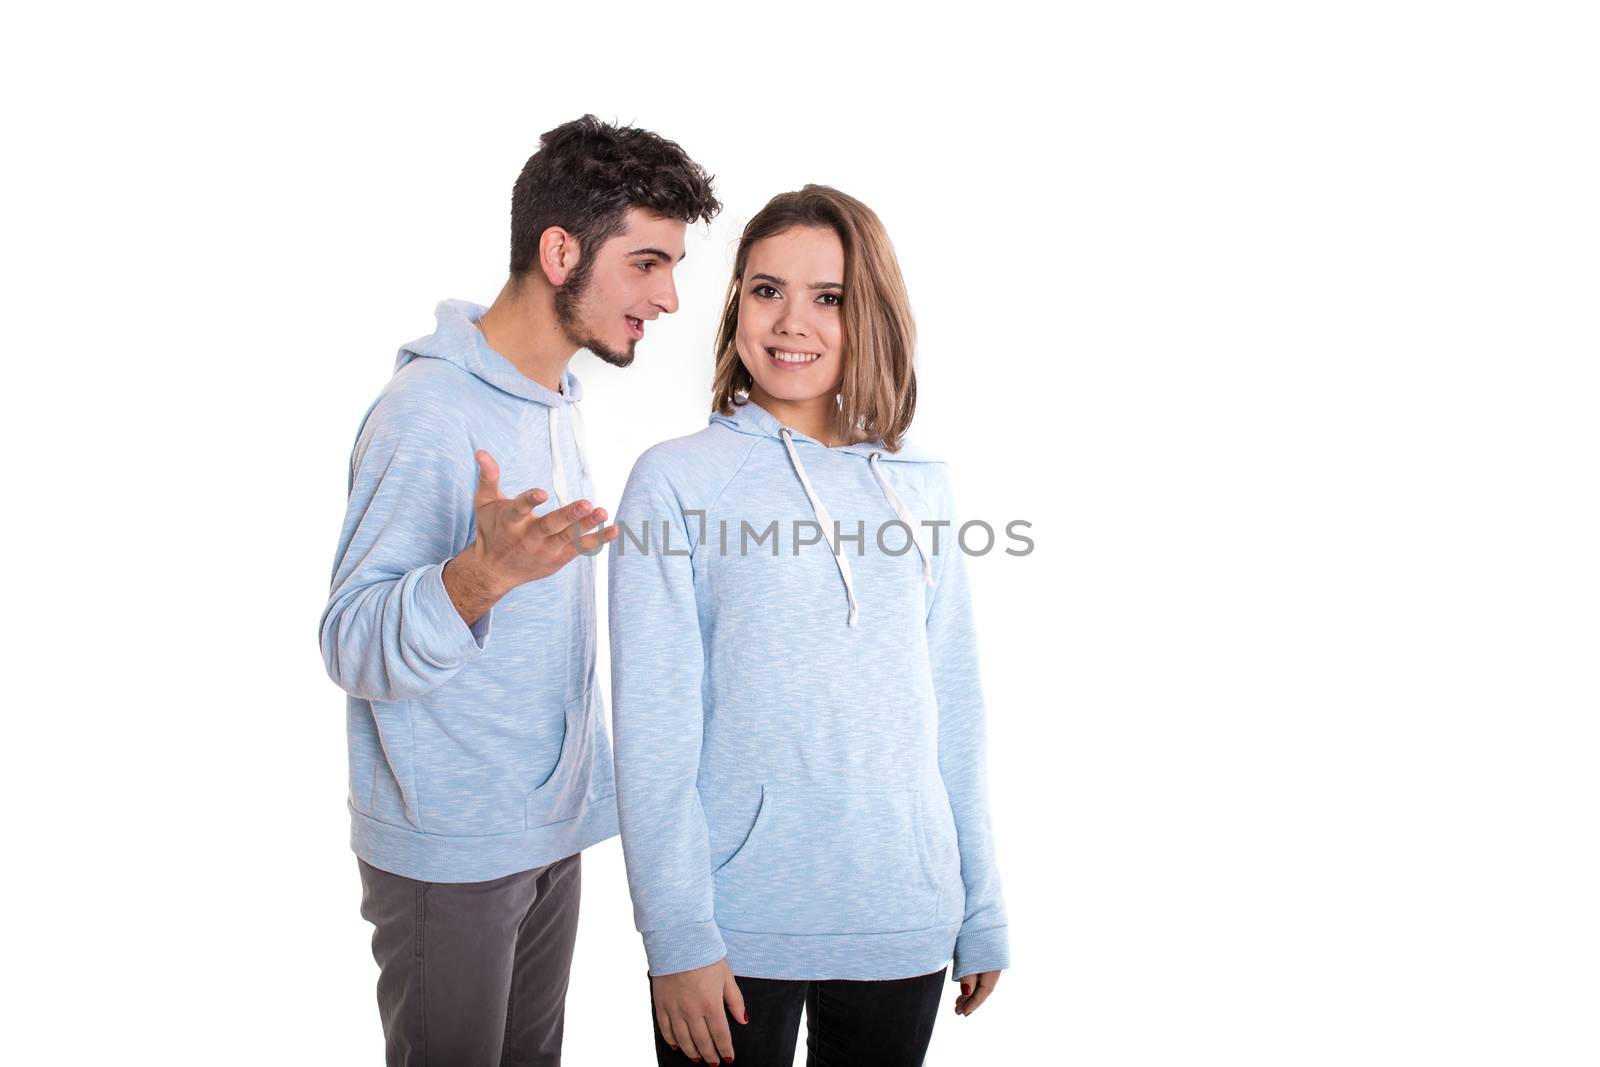 Man disputing with smiling woman, couple isolated on white